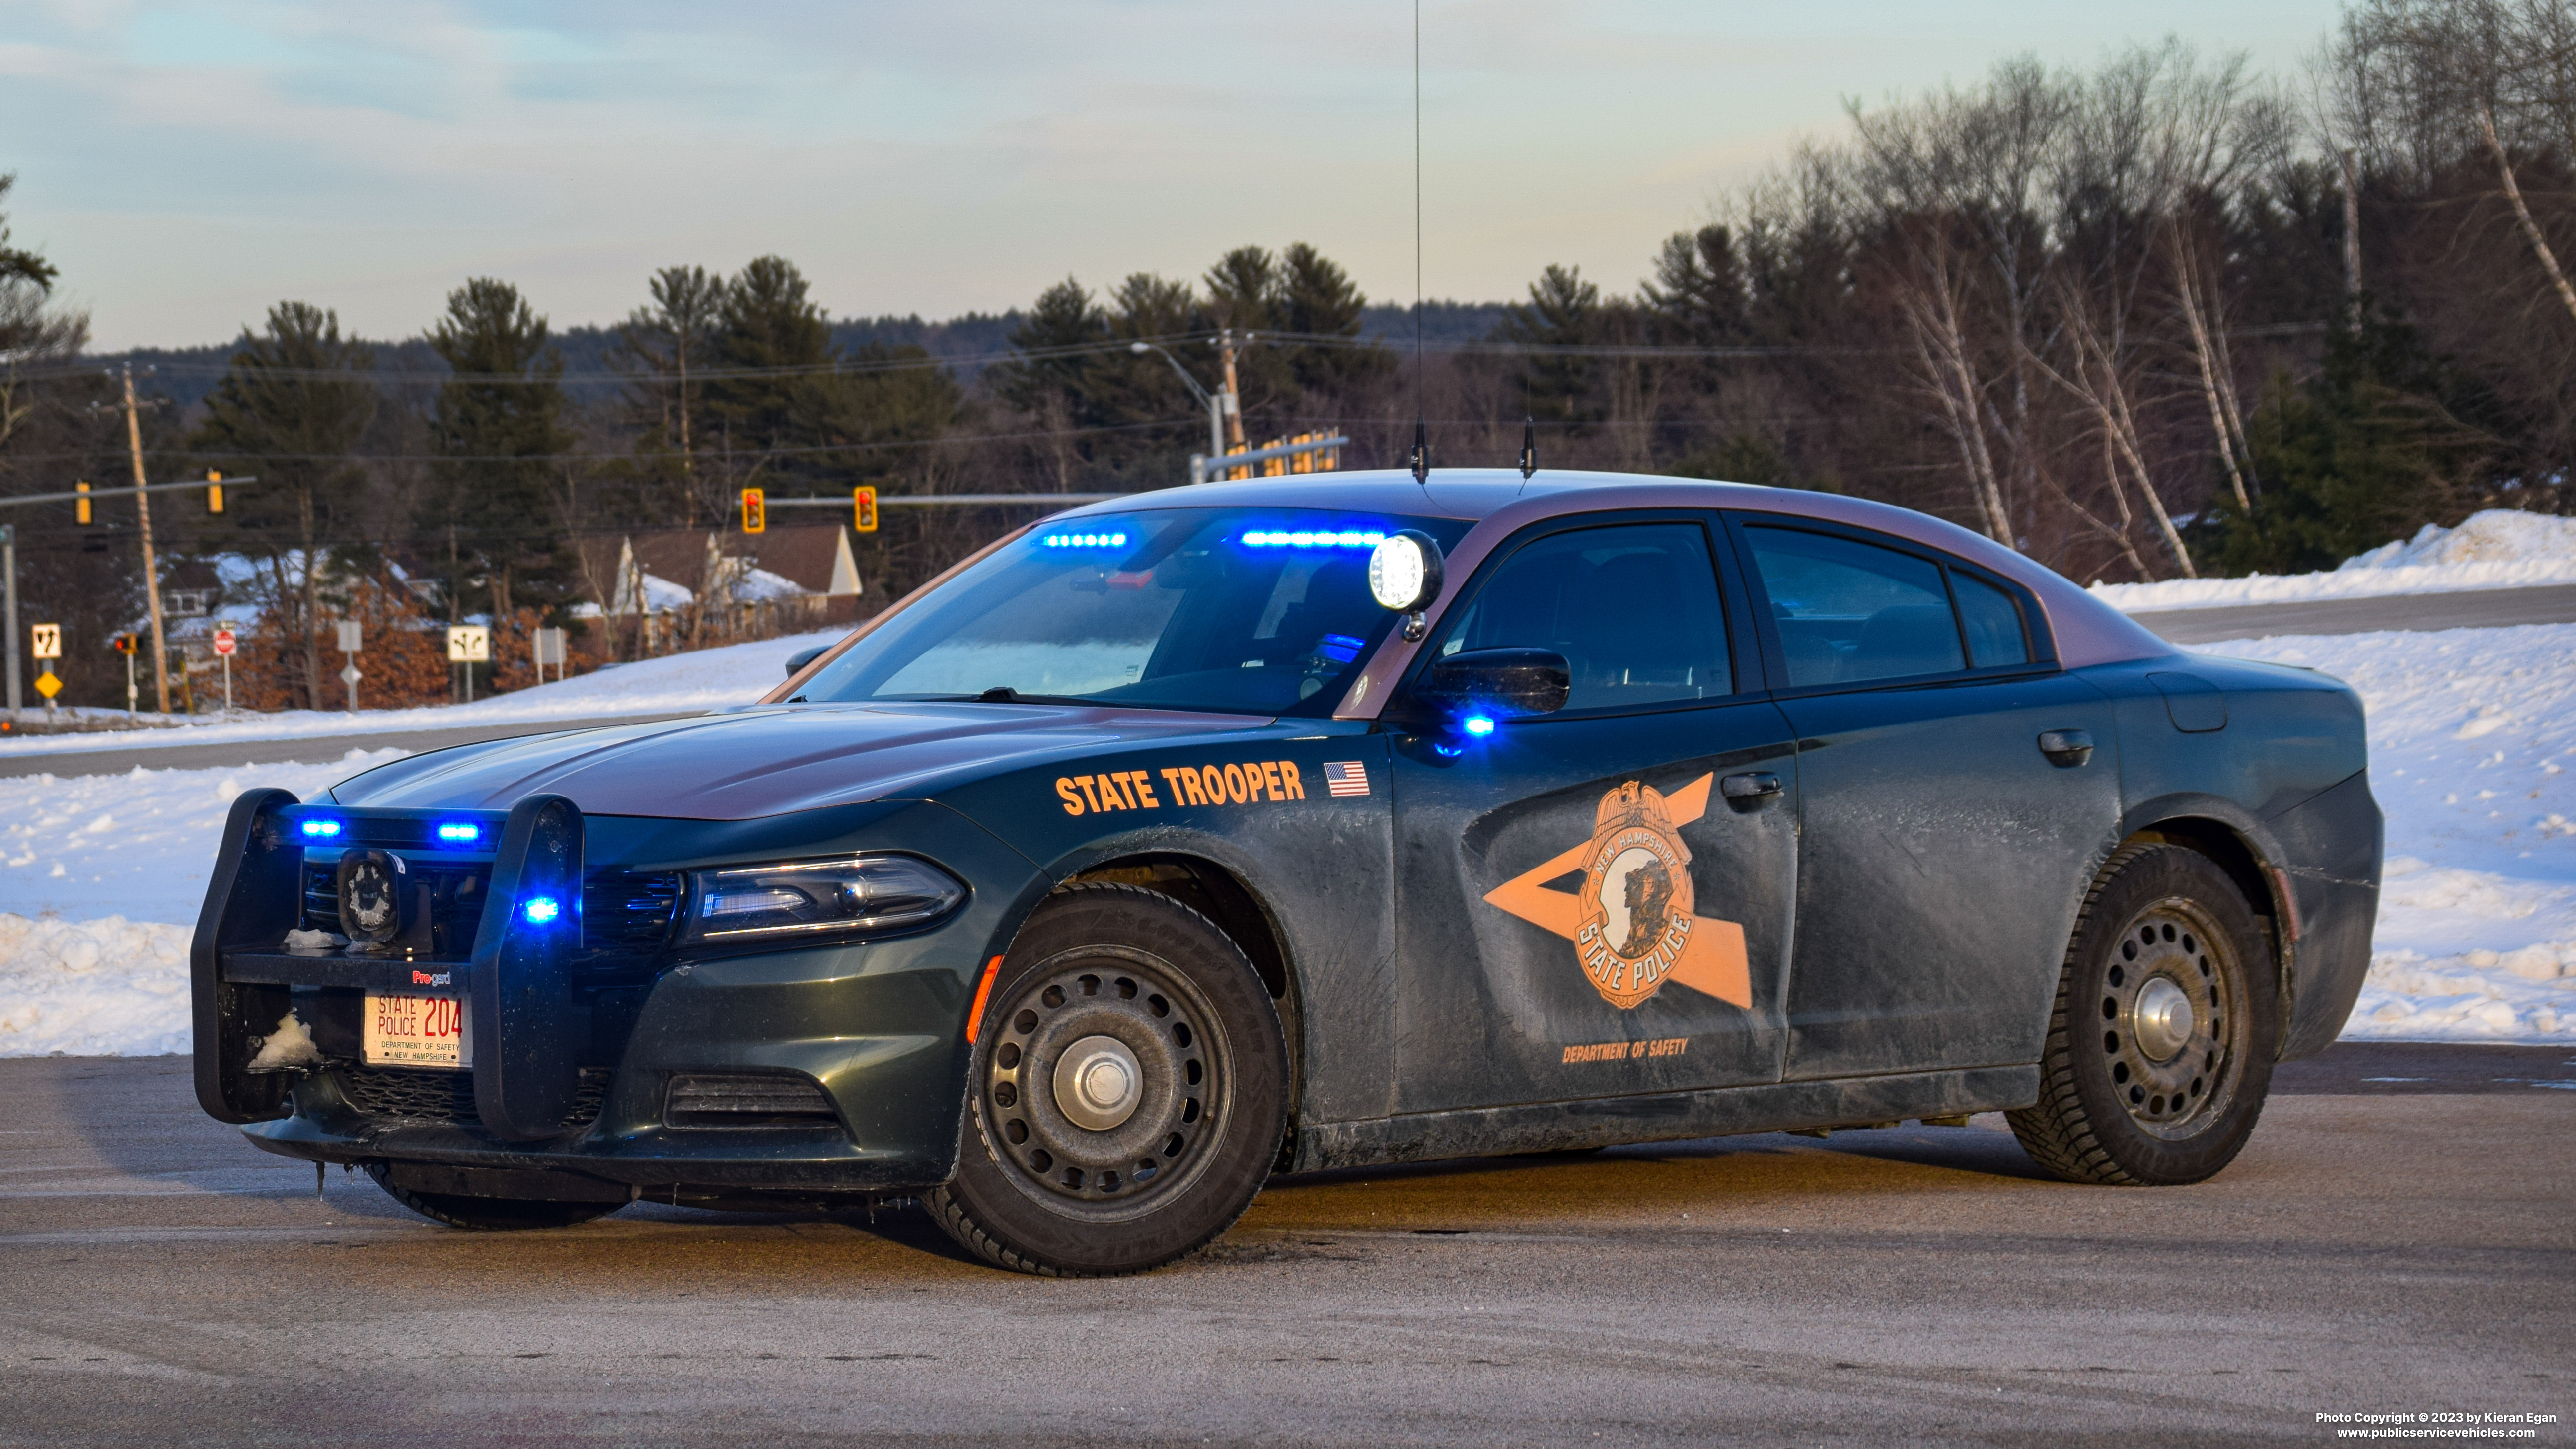 A photo  of New Hampshire State Police
            Cruiser 204, a 2018-2020 Dodge Charger             taken by Kieran Egan